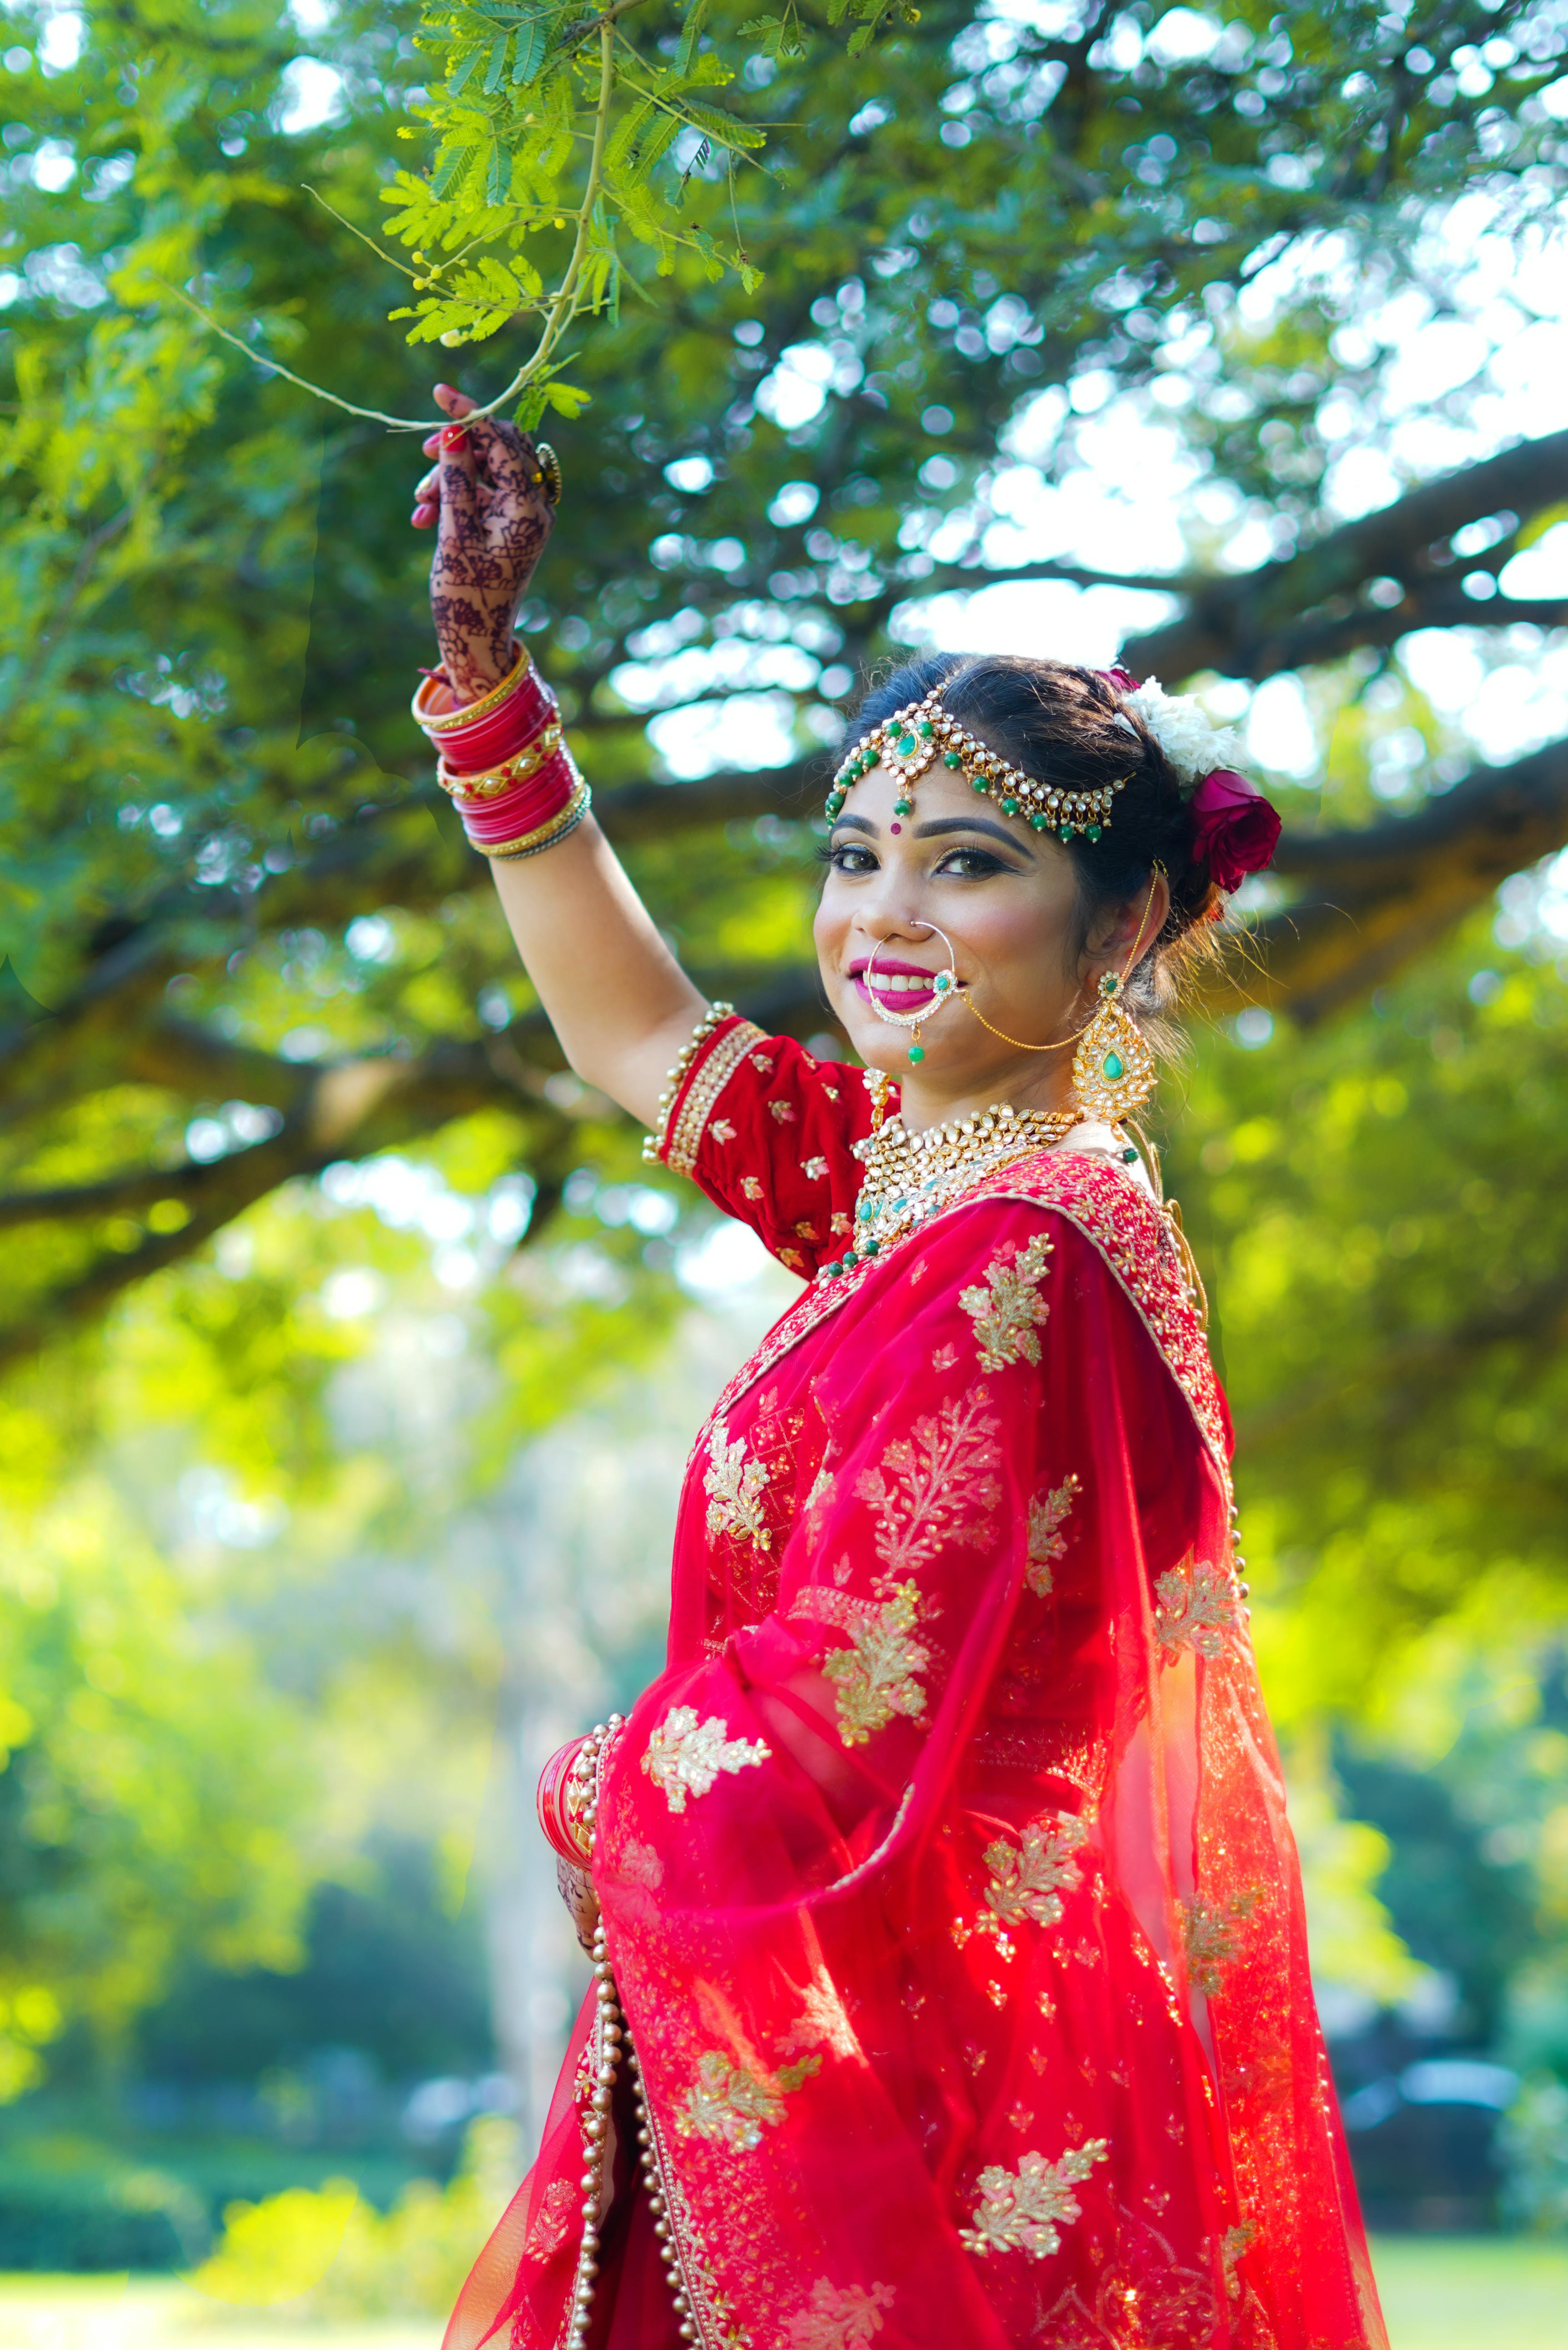 A Hindu Bride Wearing a Traditional Outfit and Henna Tattoos · Free Stock  Photo